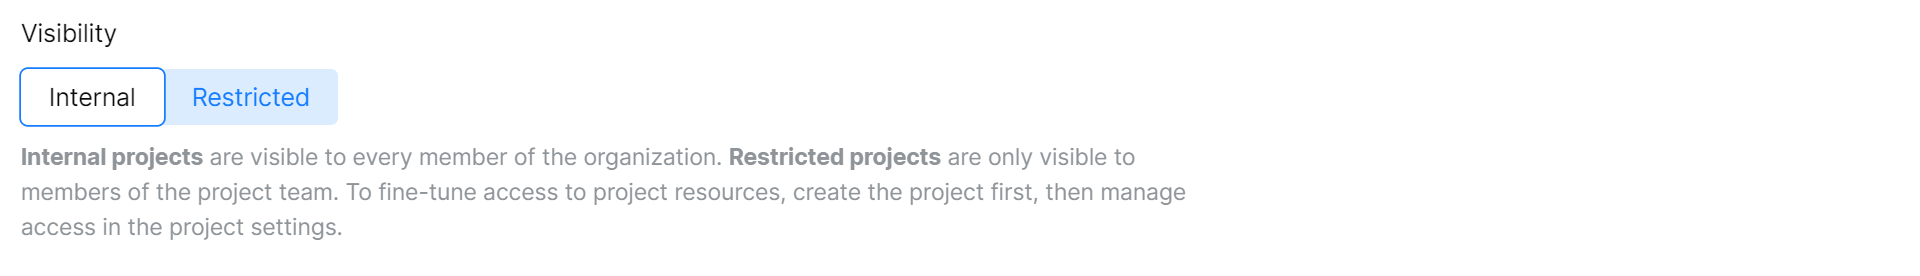 Project visibility - Internal or Restricted